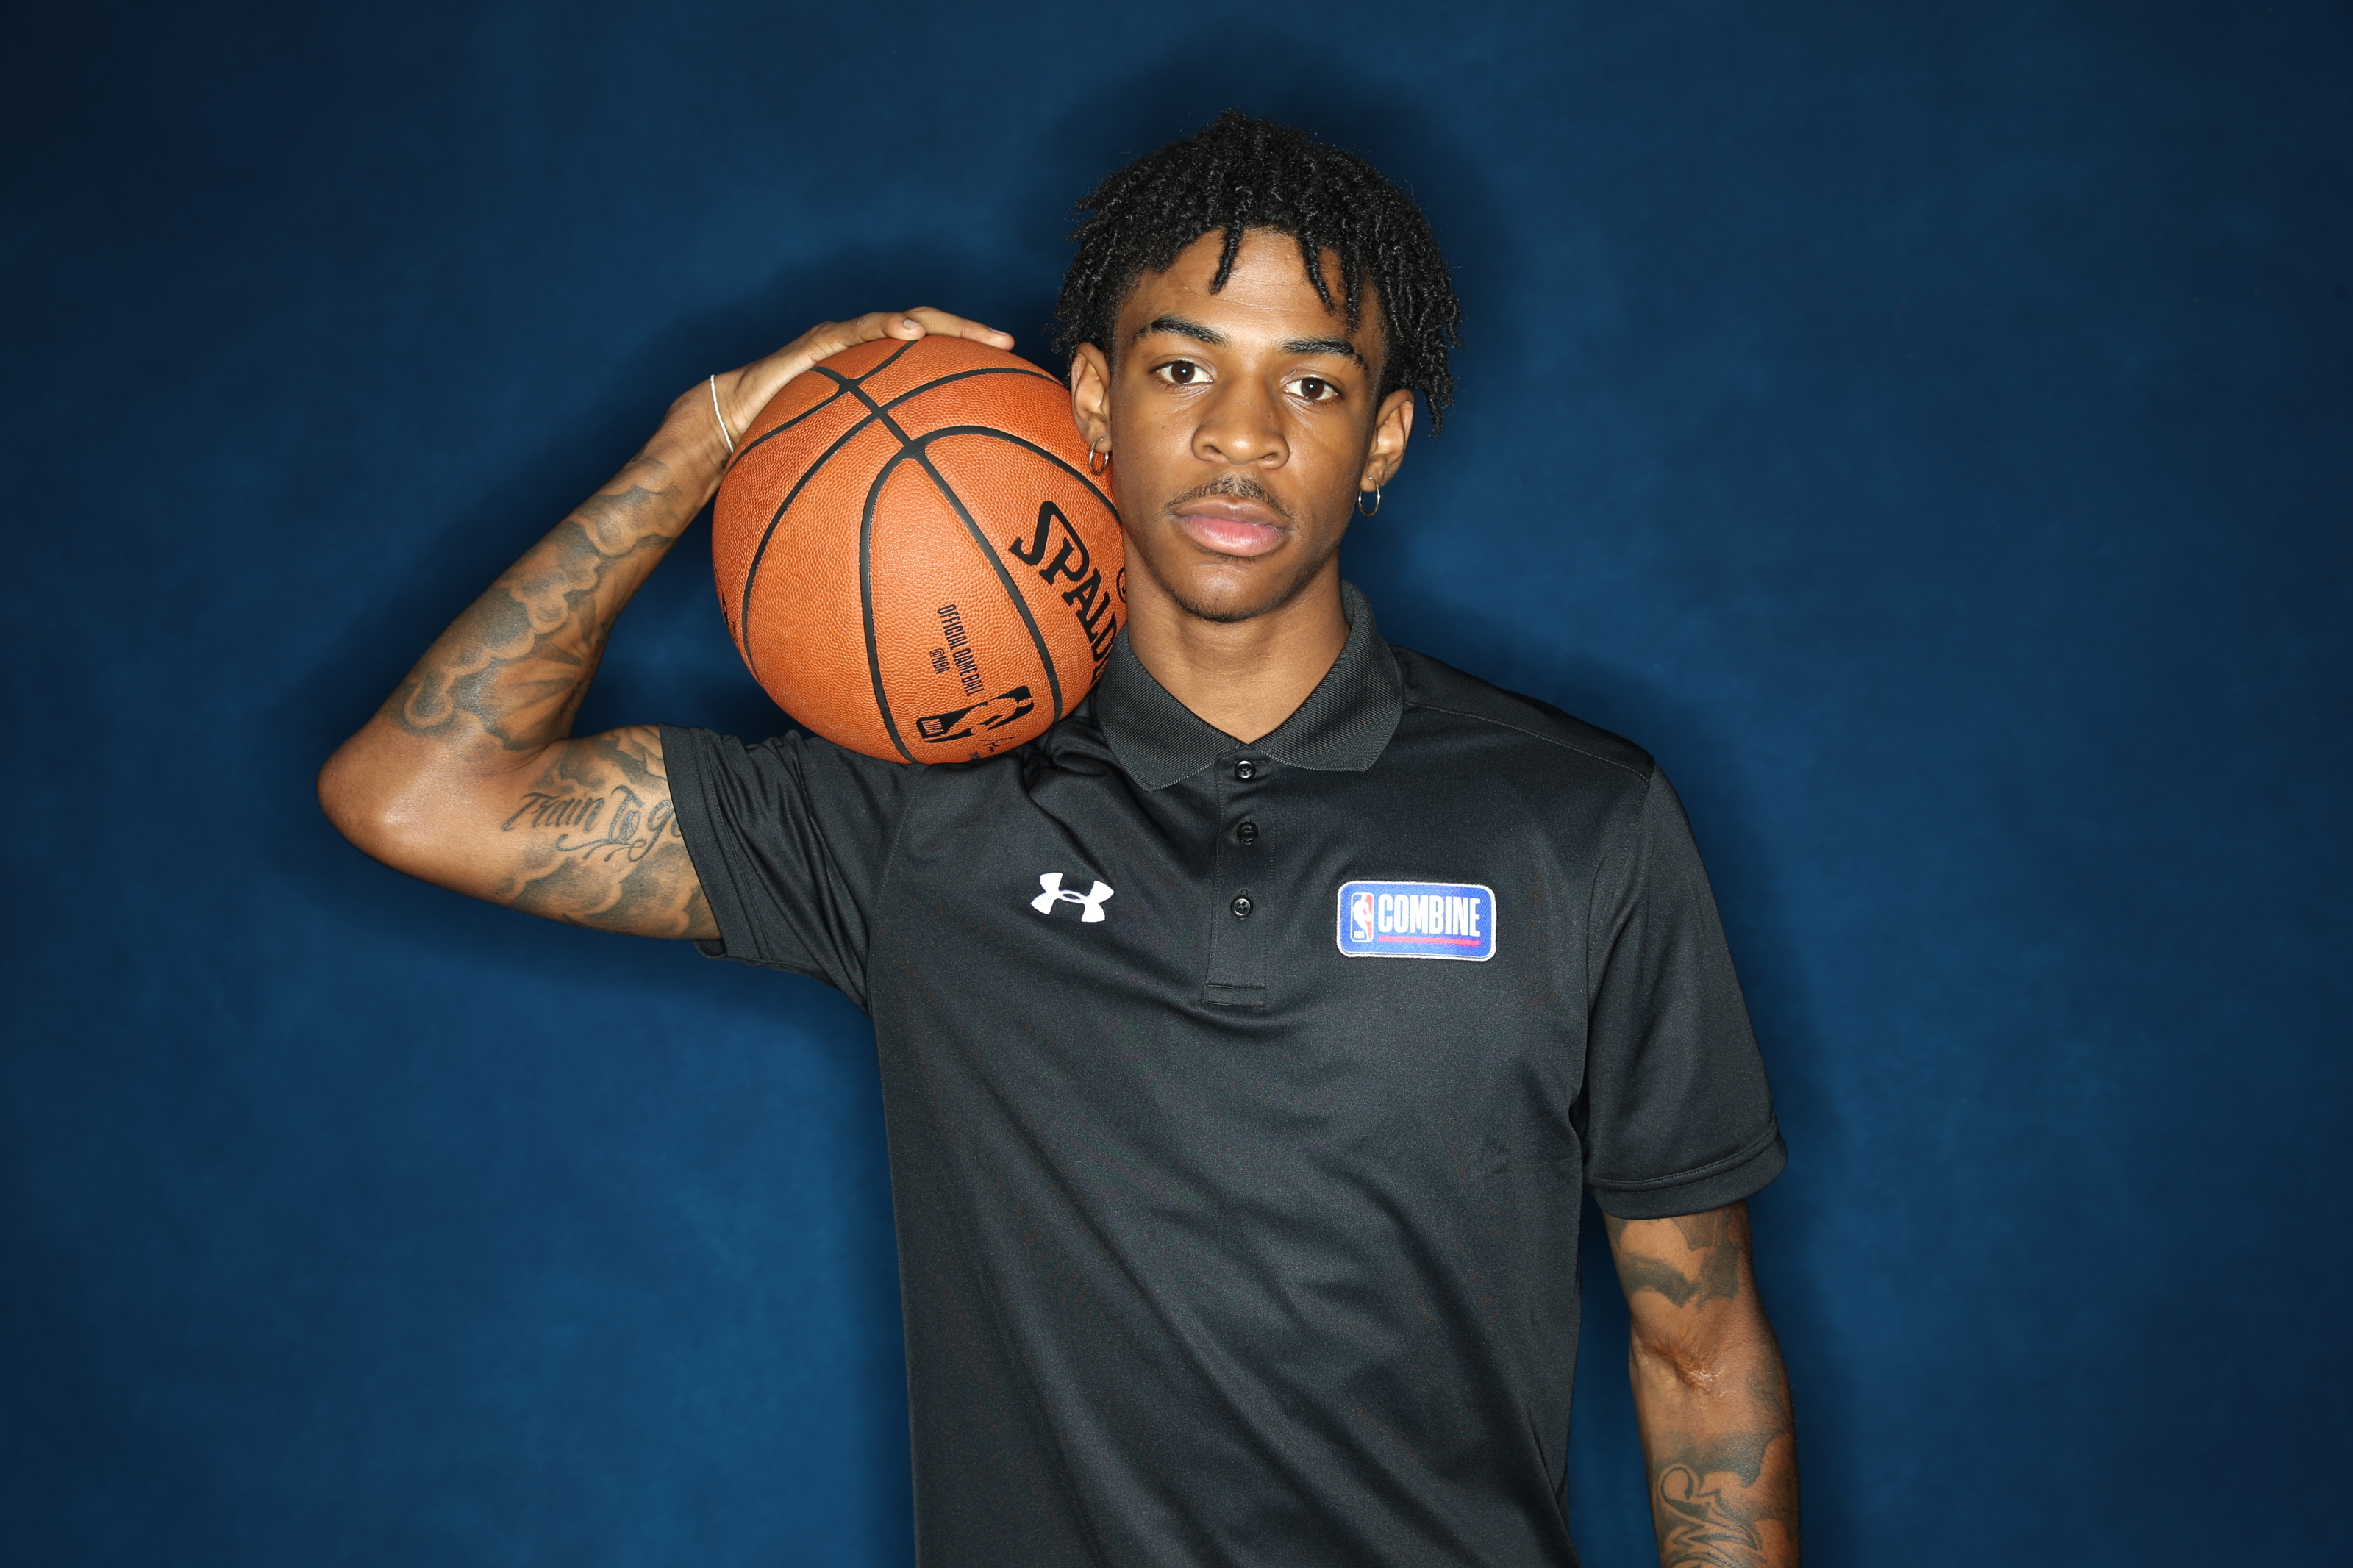 Grizzlies select Ja Morant with second overall pick in 2019 NBA Draft